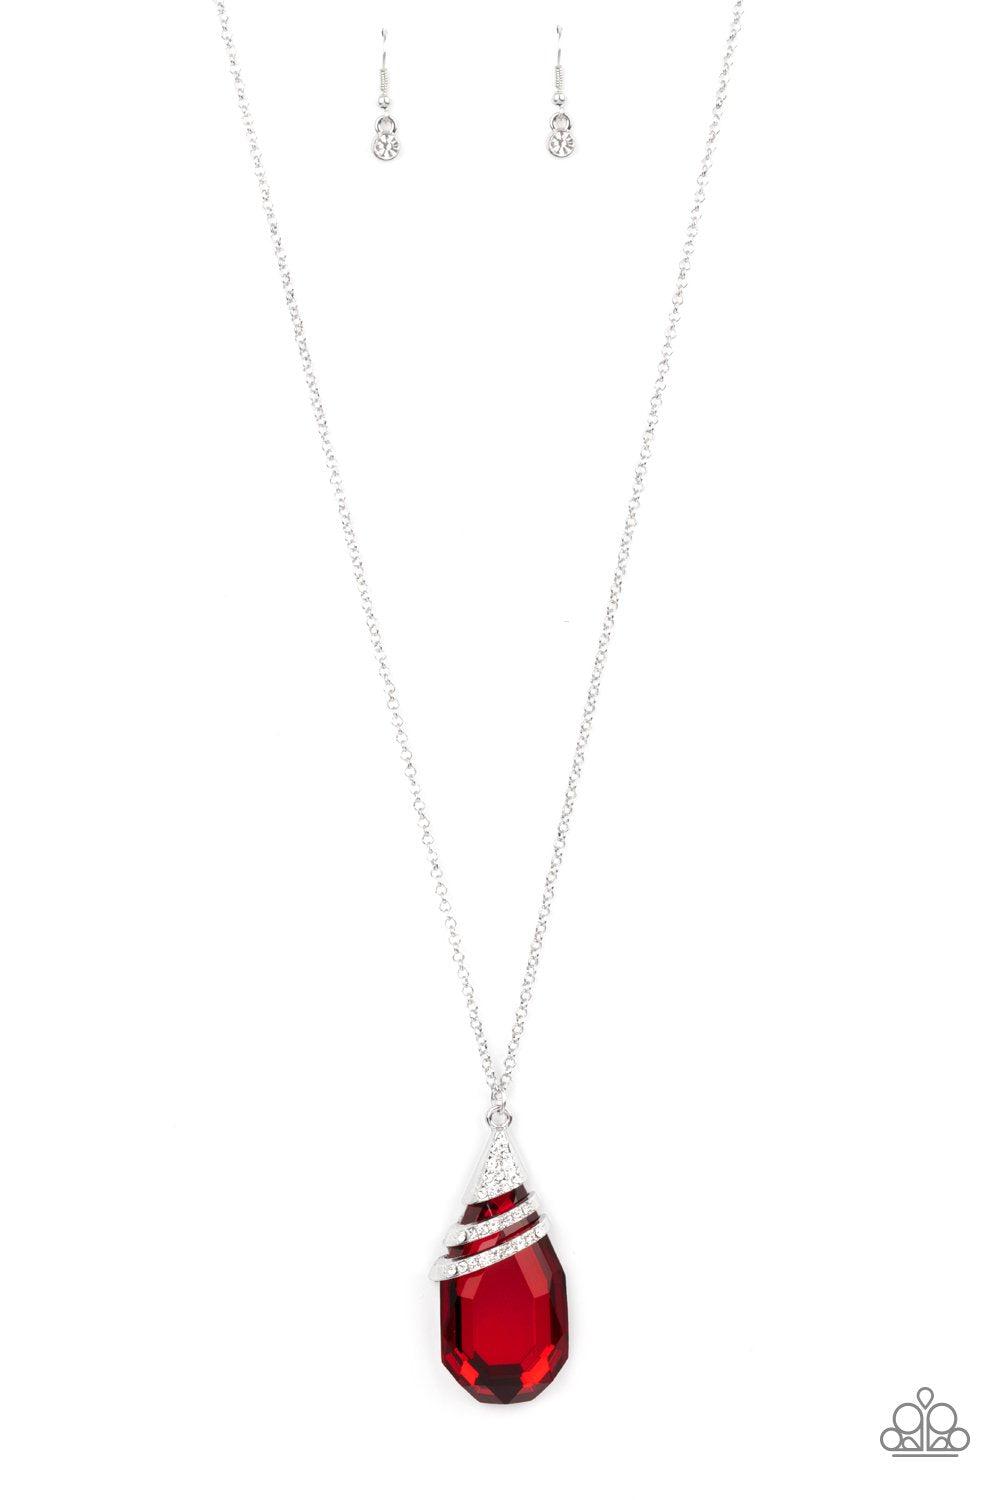 Demandingly Diva Red and White Rhinestone Pendant Necklace - Paparazzi Accessories 2021 Convention Exclusive- lightbox - CarasShop.com - $5 Jewelry by Cara Jewels